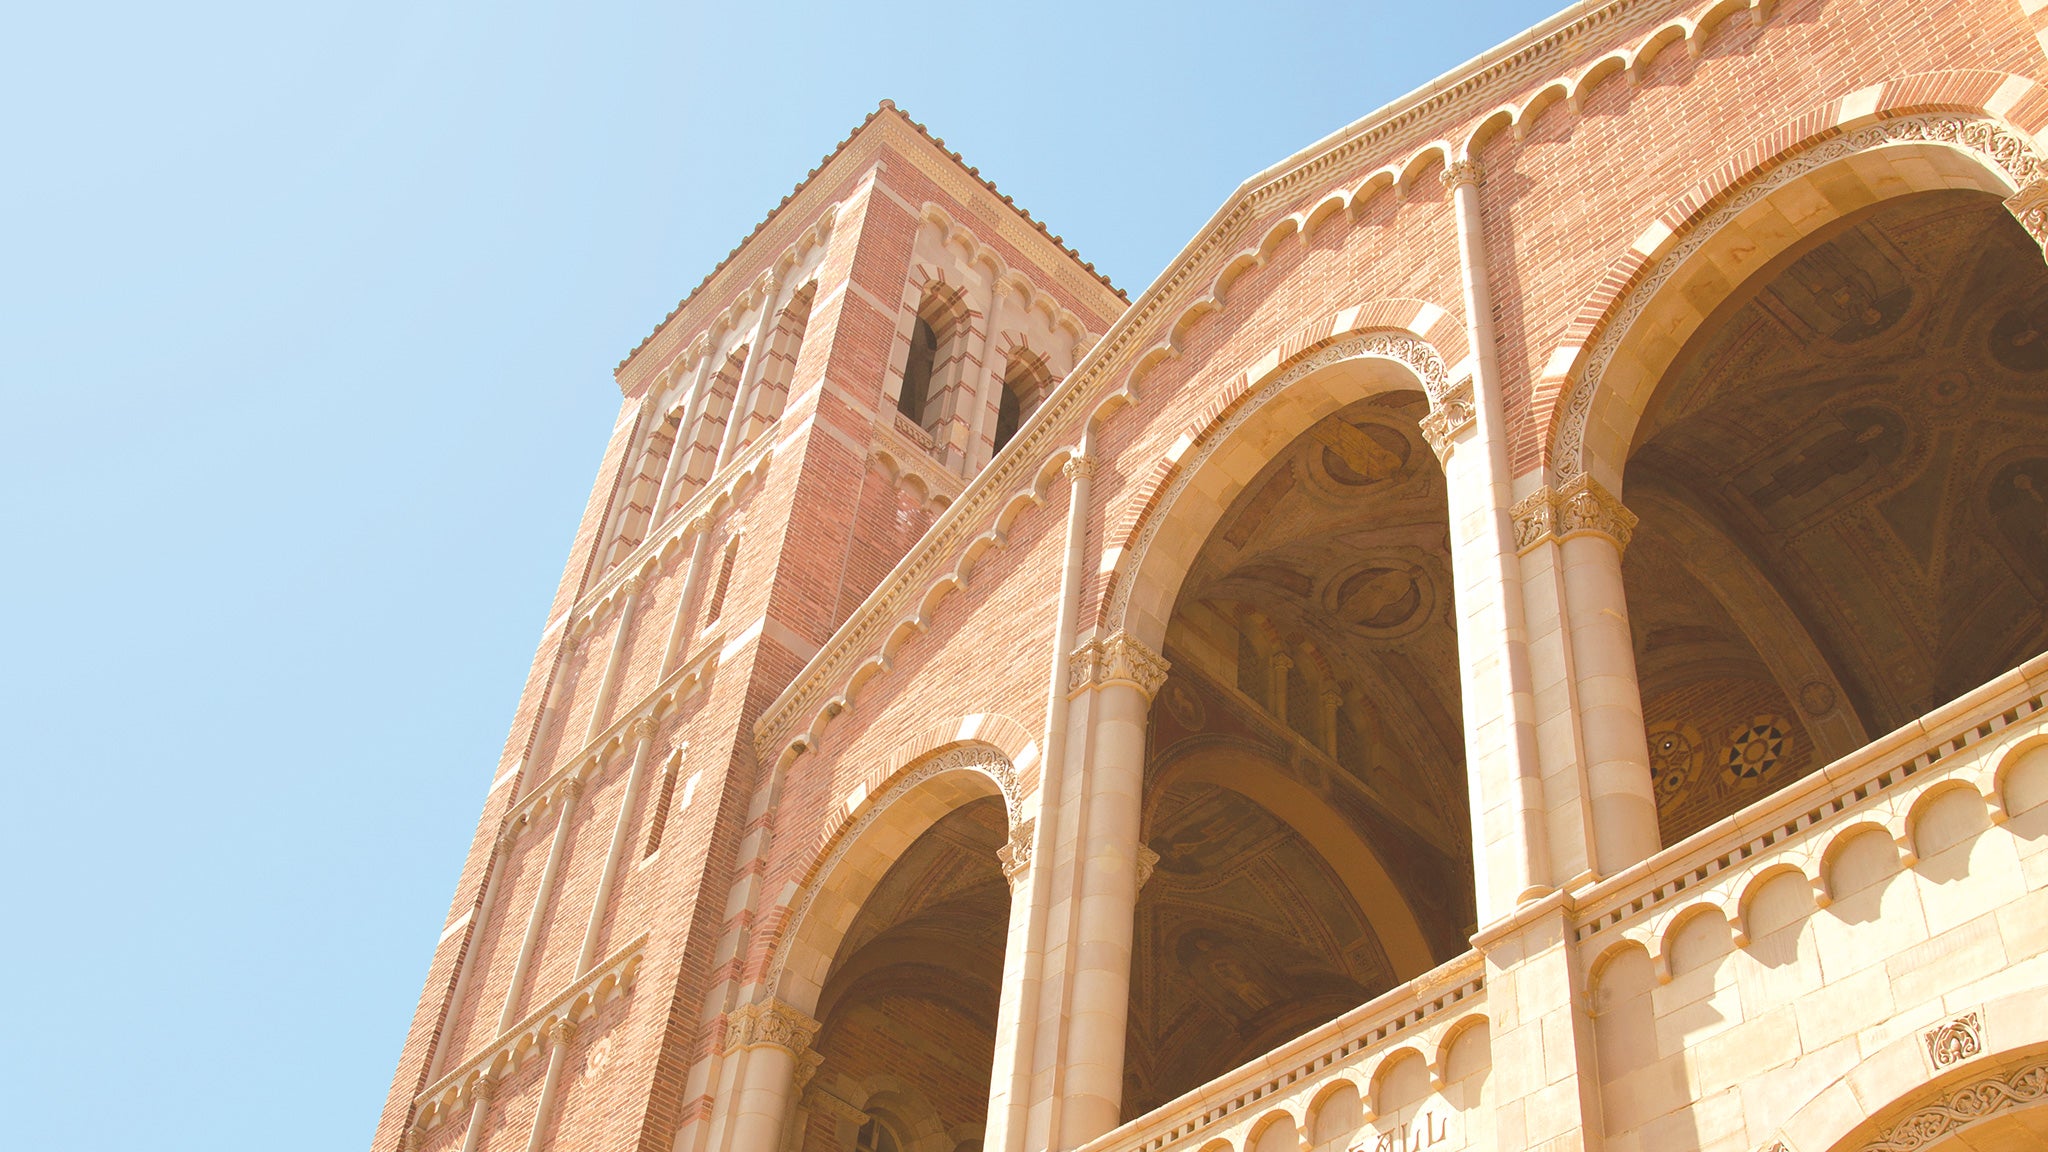 Royce Hall, one of UCLA’s four original buildings, basks in the sunlight.